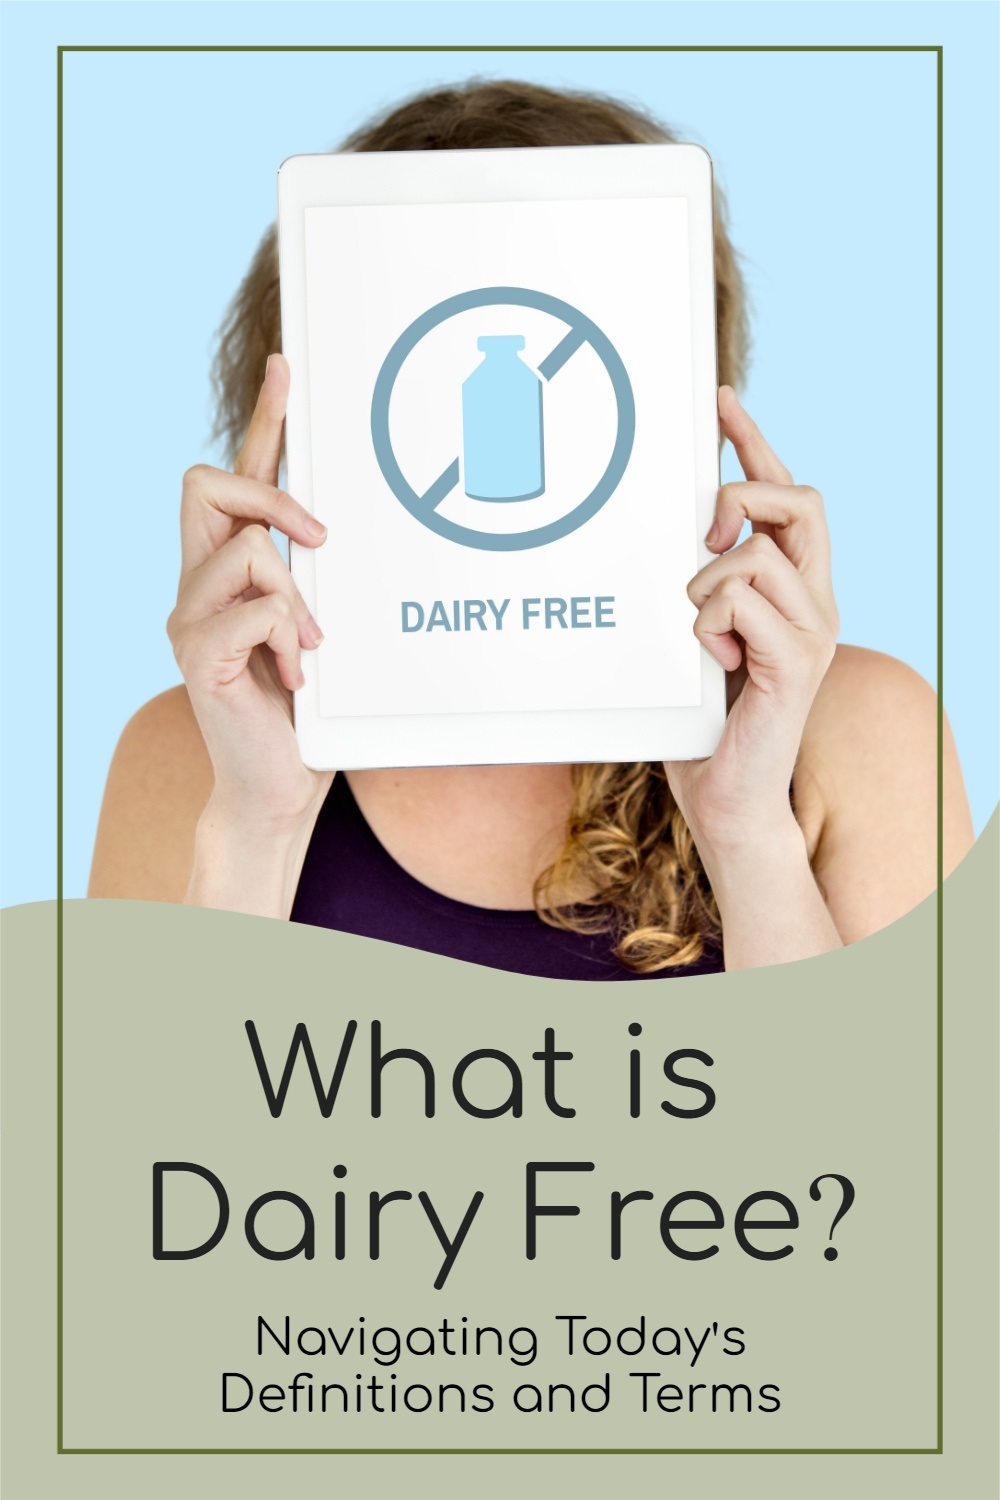 Today's Definition and Navigating Other Terms - like milk-free, lactose-free, vegan, animal-free, non-dairy, and more!